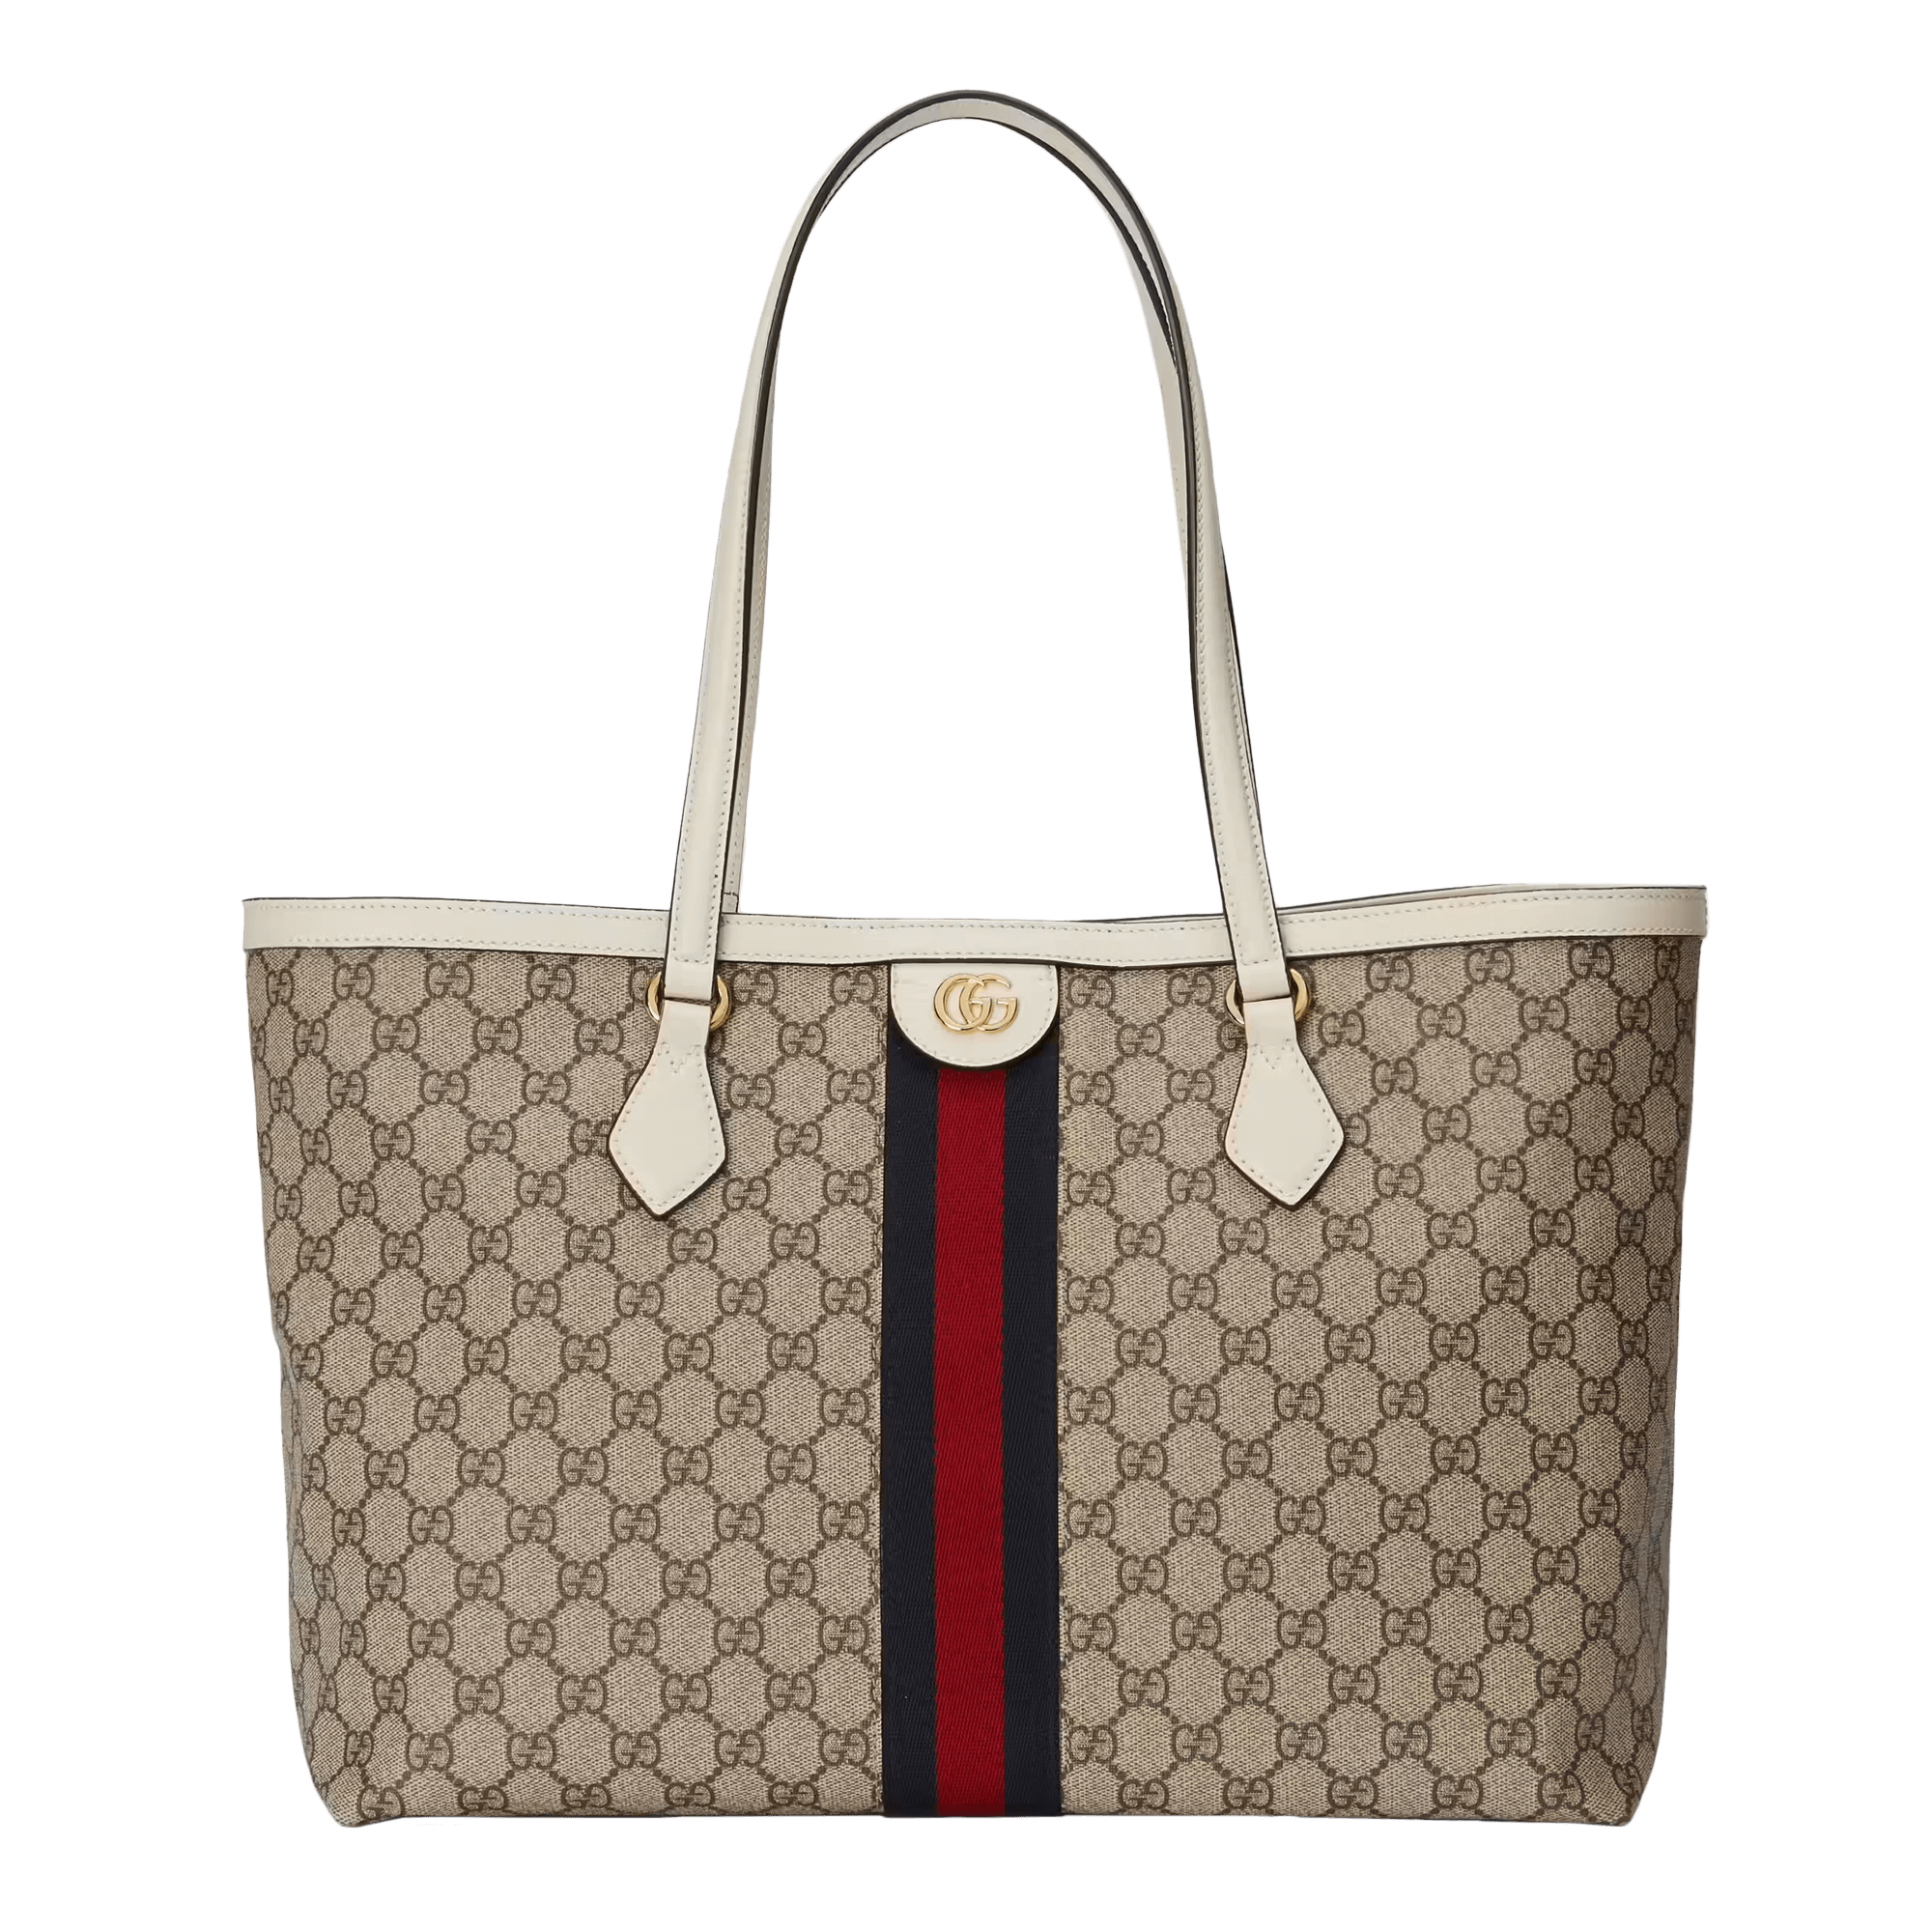 Ophidia GG medium tote in beige and white canvas